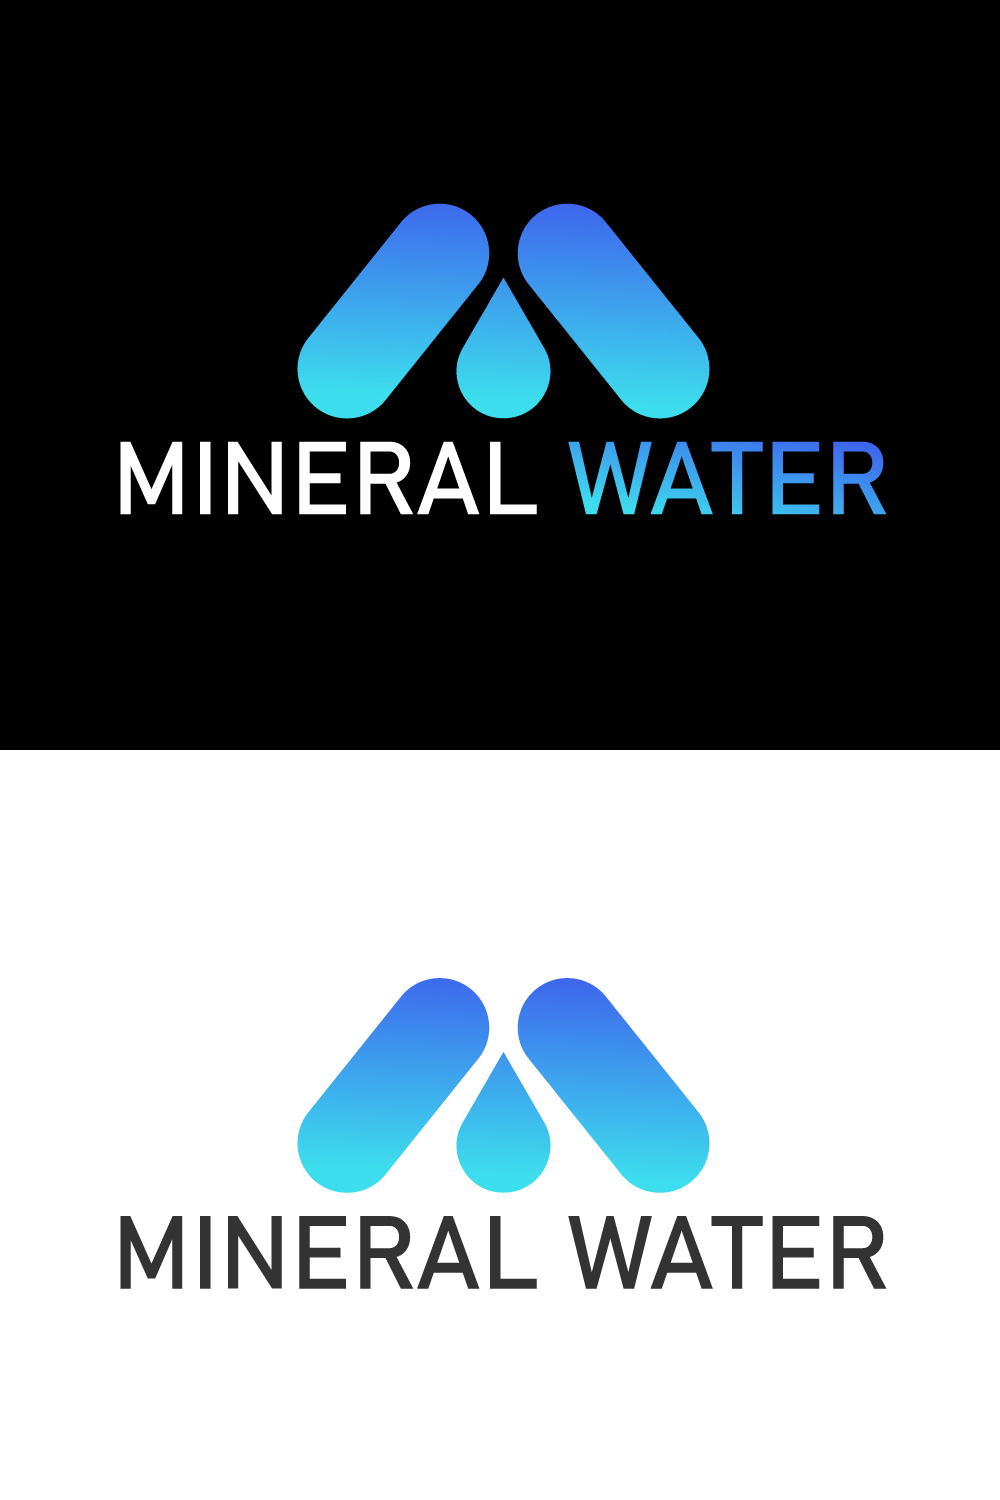 Mineral-water pinterest preview image.